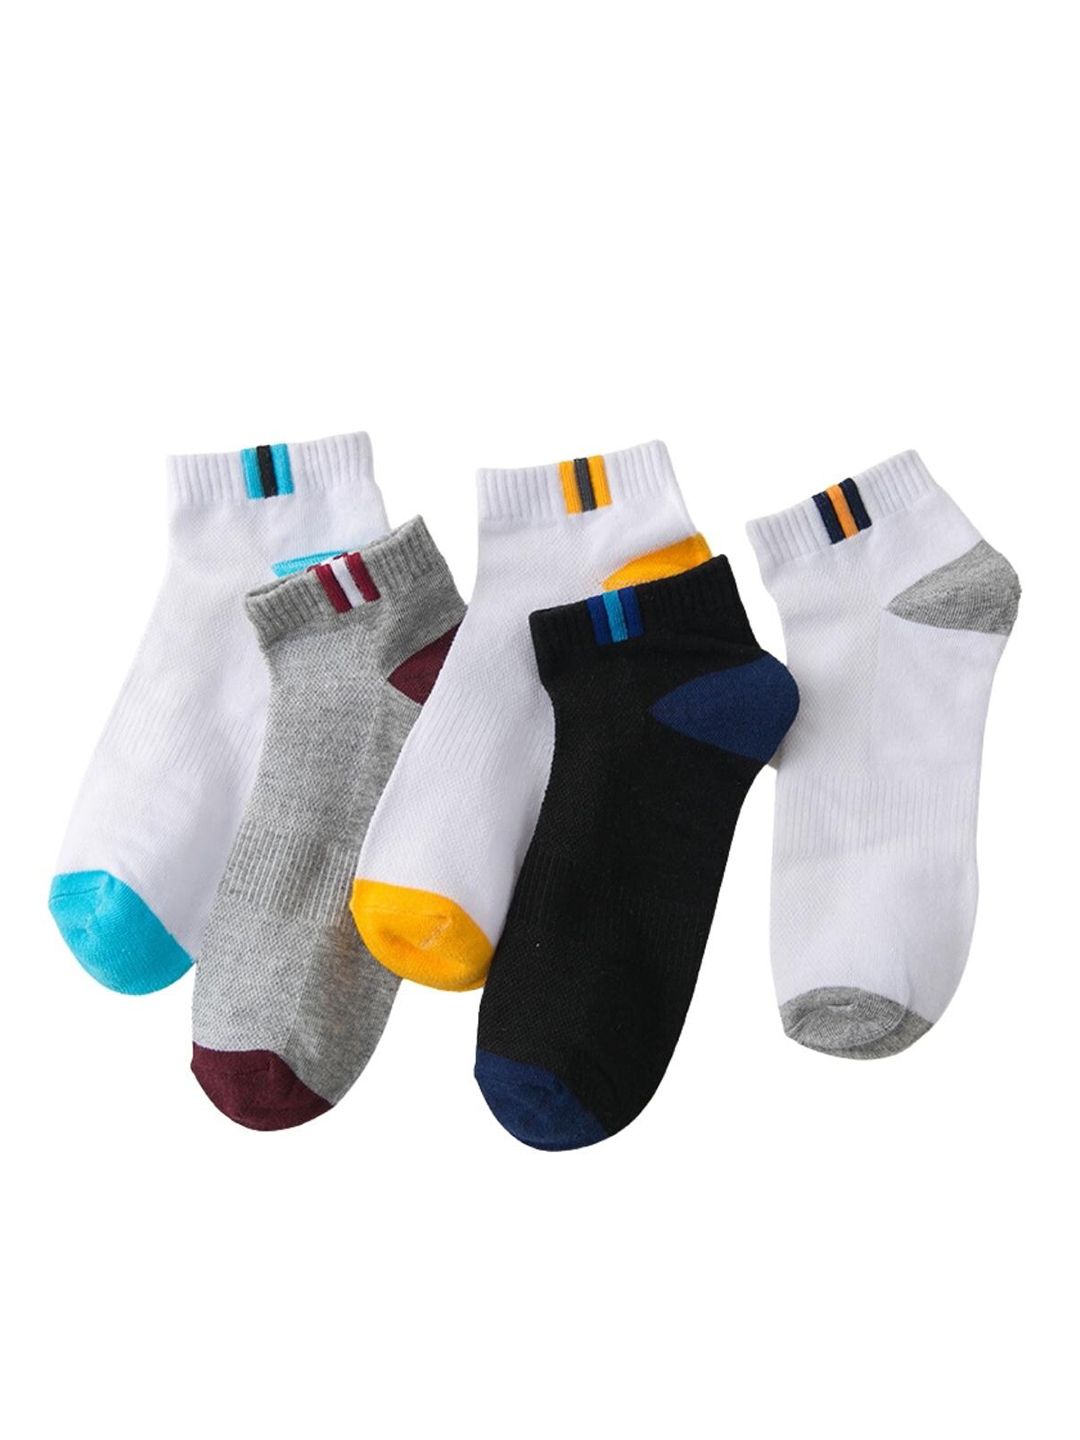 YOUSTYLO Pack of 5 Patterned Ankle Length Socks Price in India